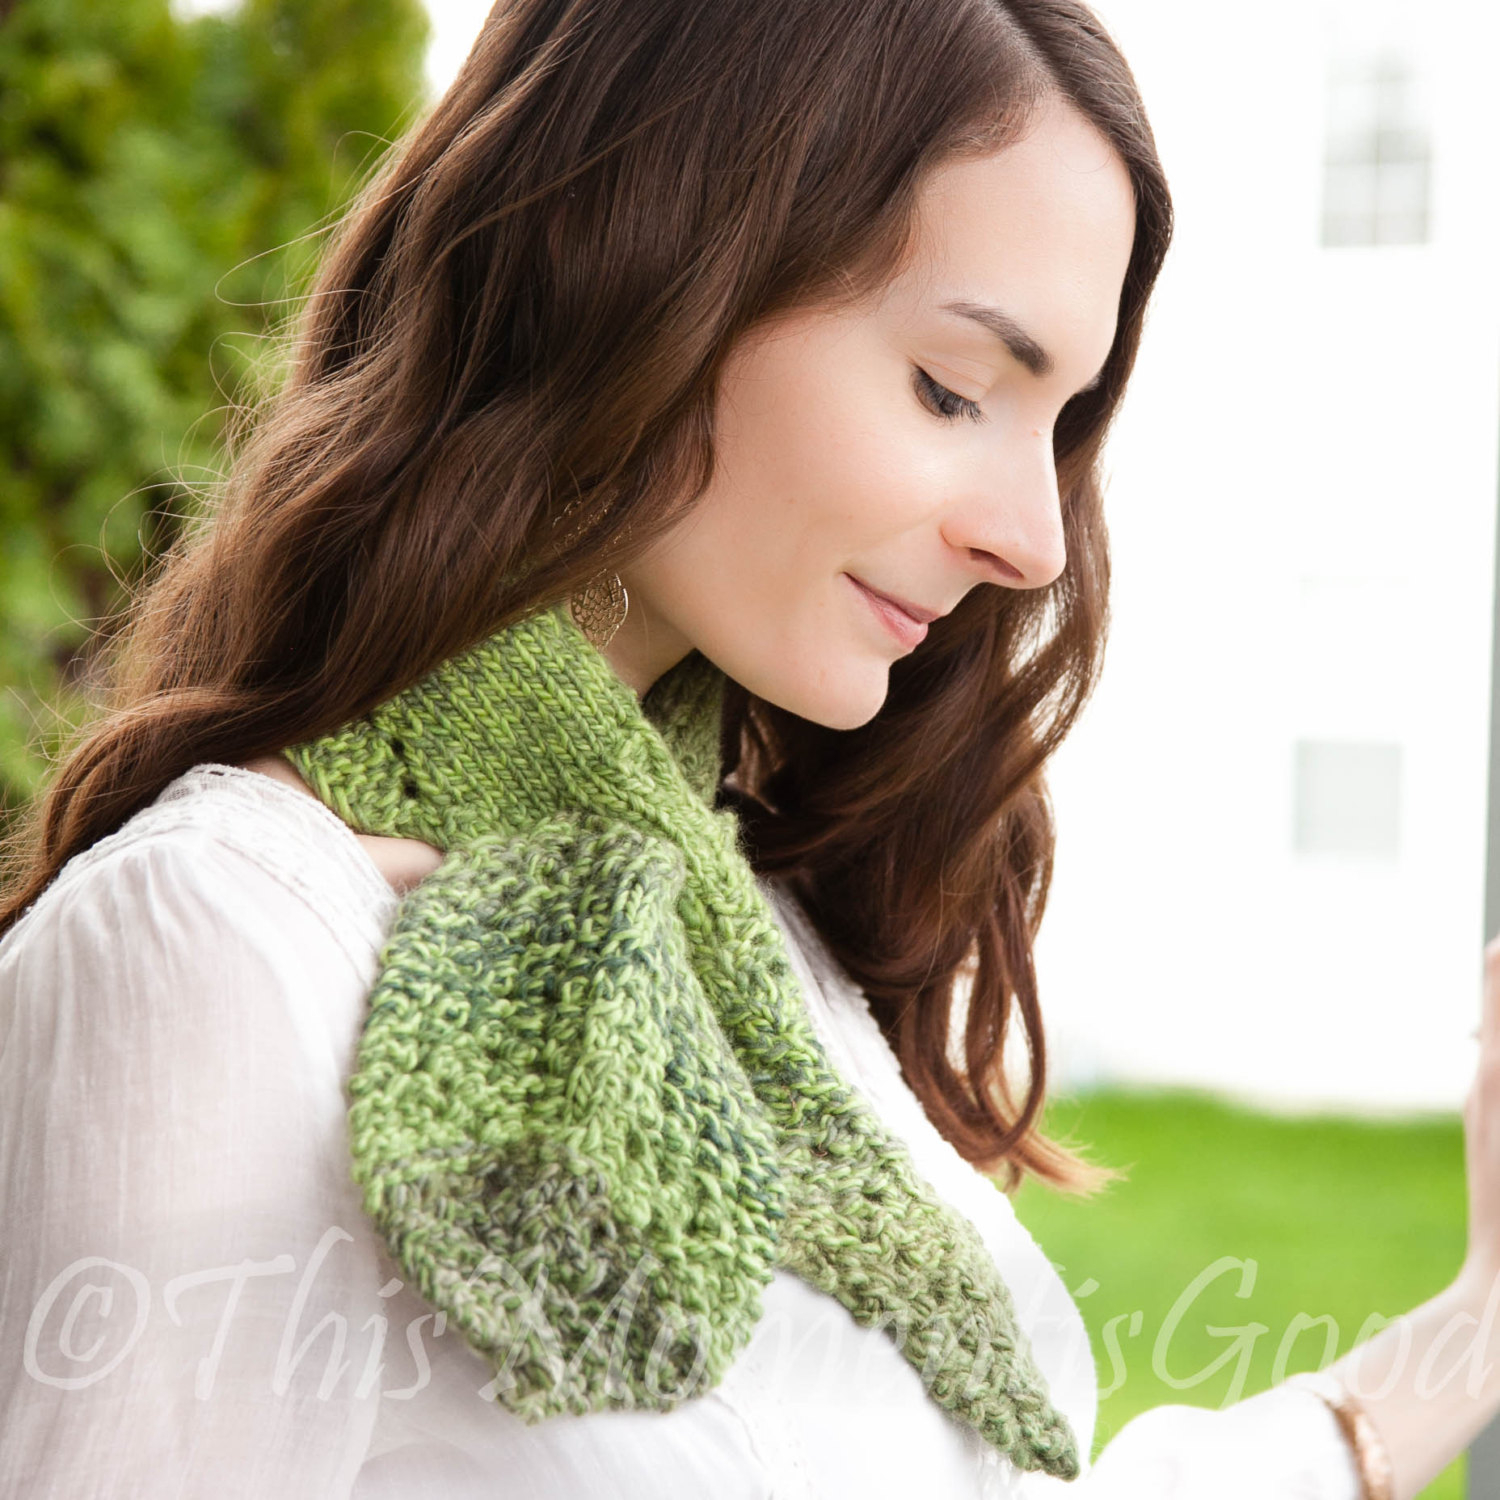 Ascot Scarf Knitting Pattern Loom Knit Keyhole Scarf Pattern Loom Knit Leaf Scarflet Cowl Ascot Leaves And Lace Pdf Pattern Available For Immediate Download